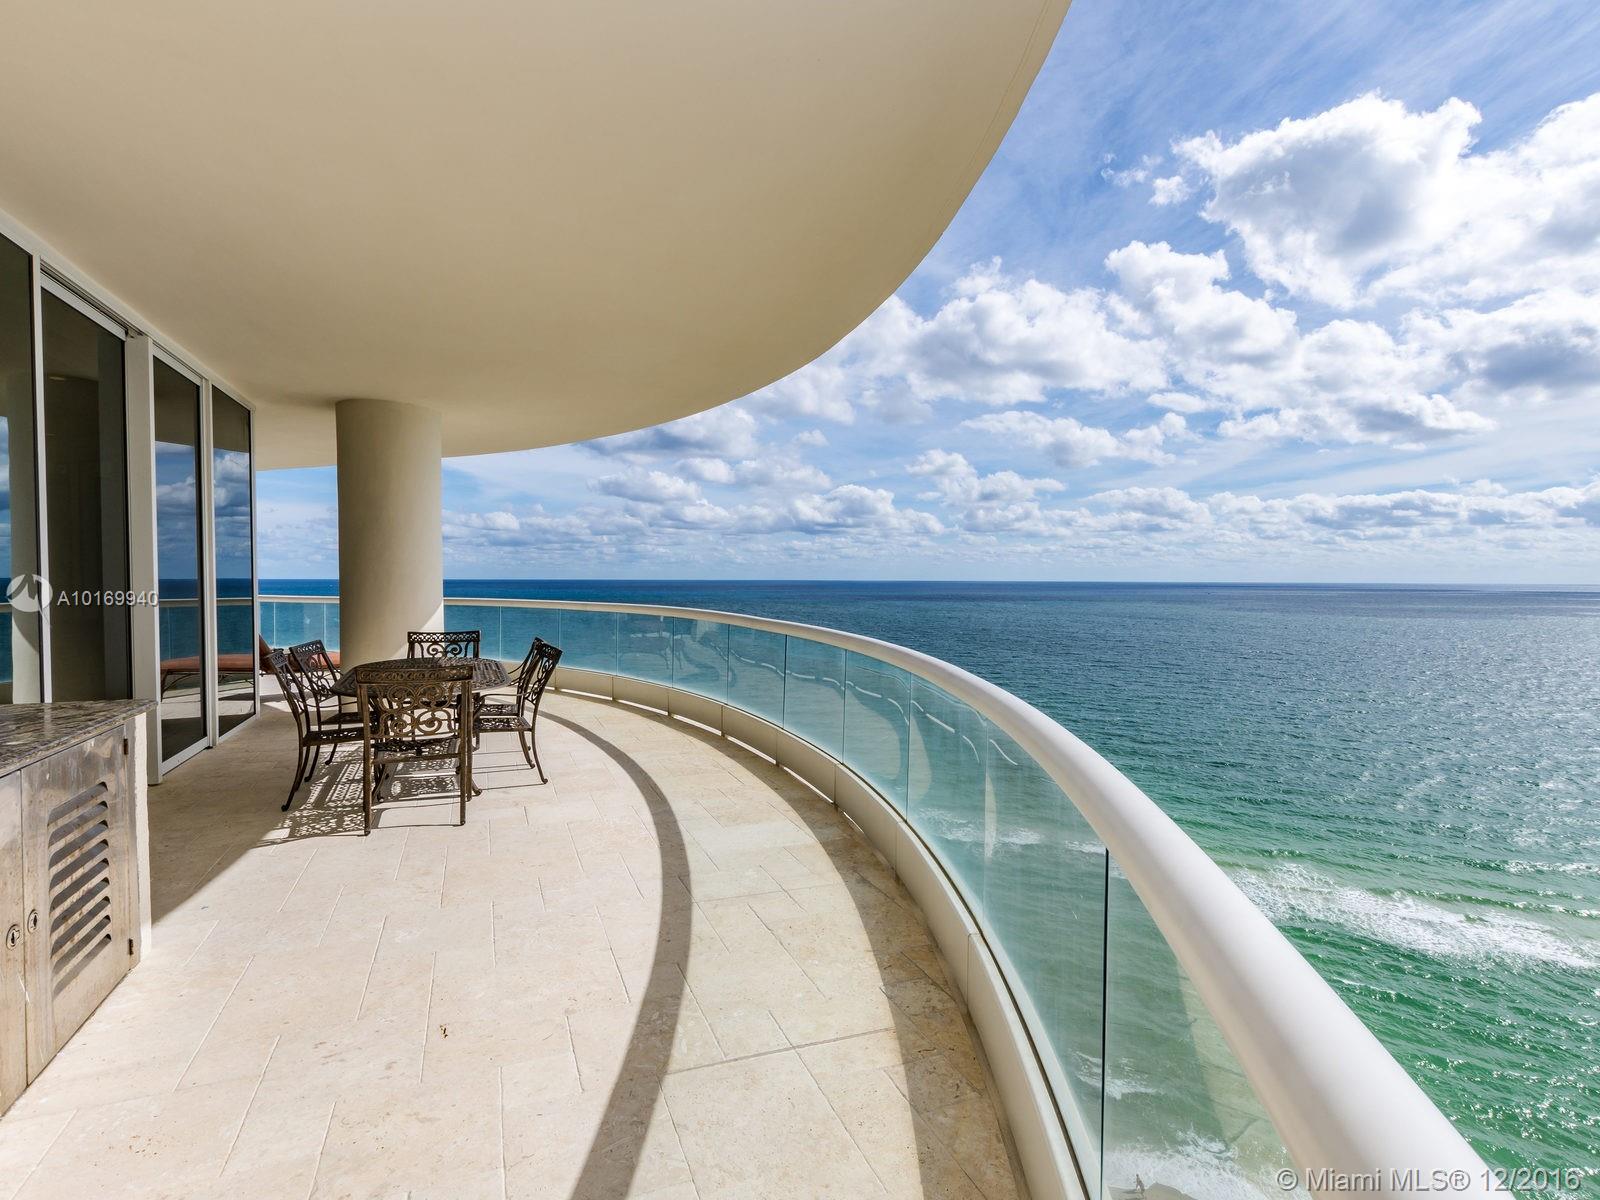 Turnberry Ocean Colony Unit 1904 Condo for Sale in Sunny